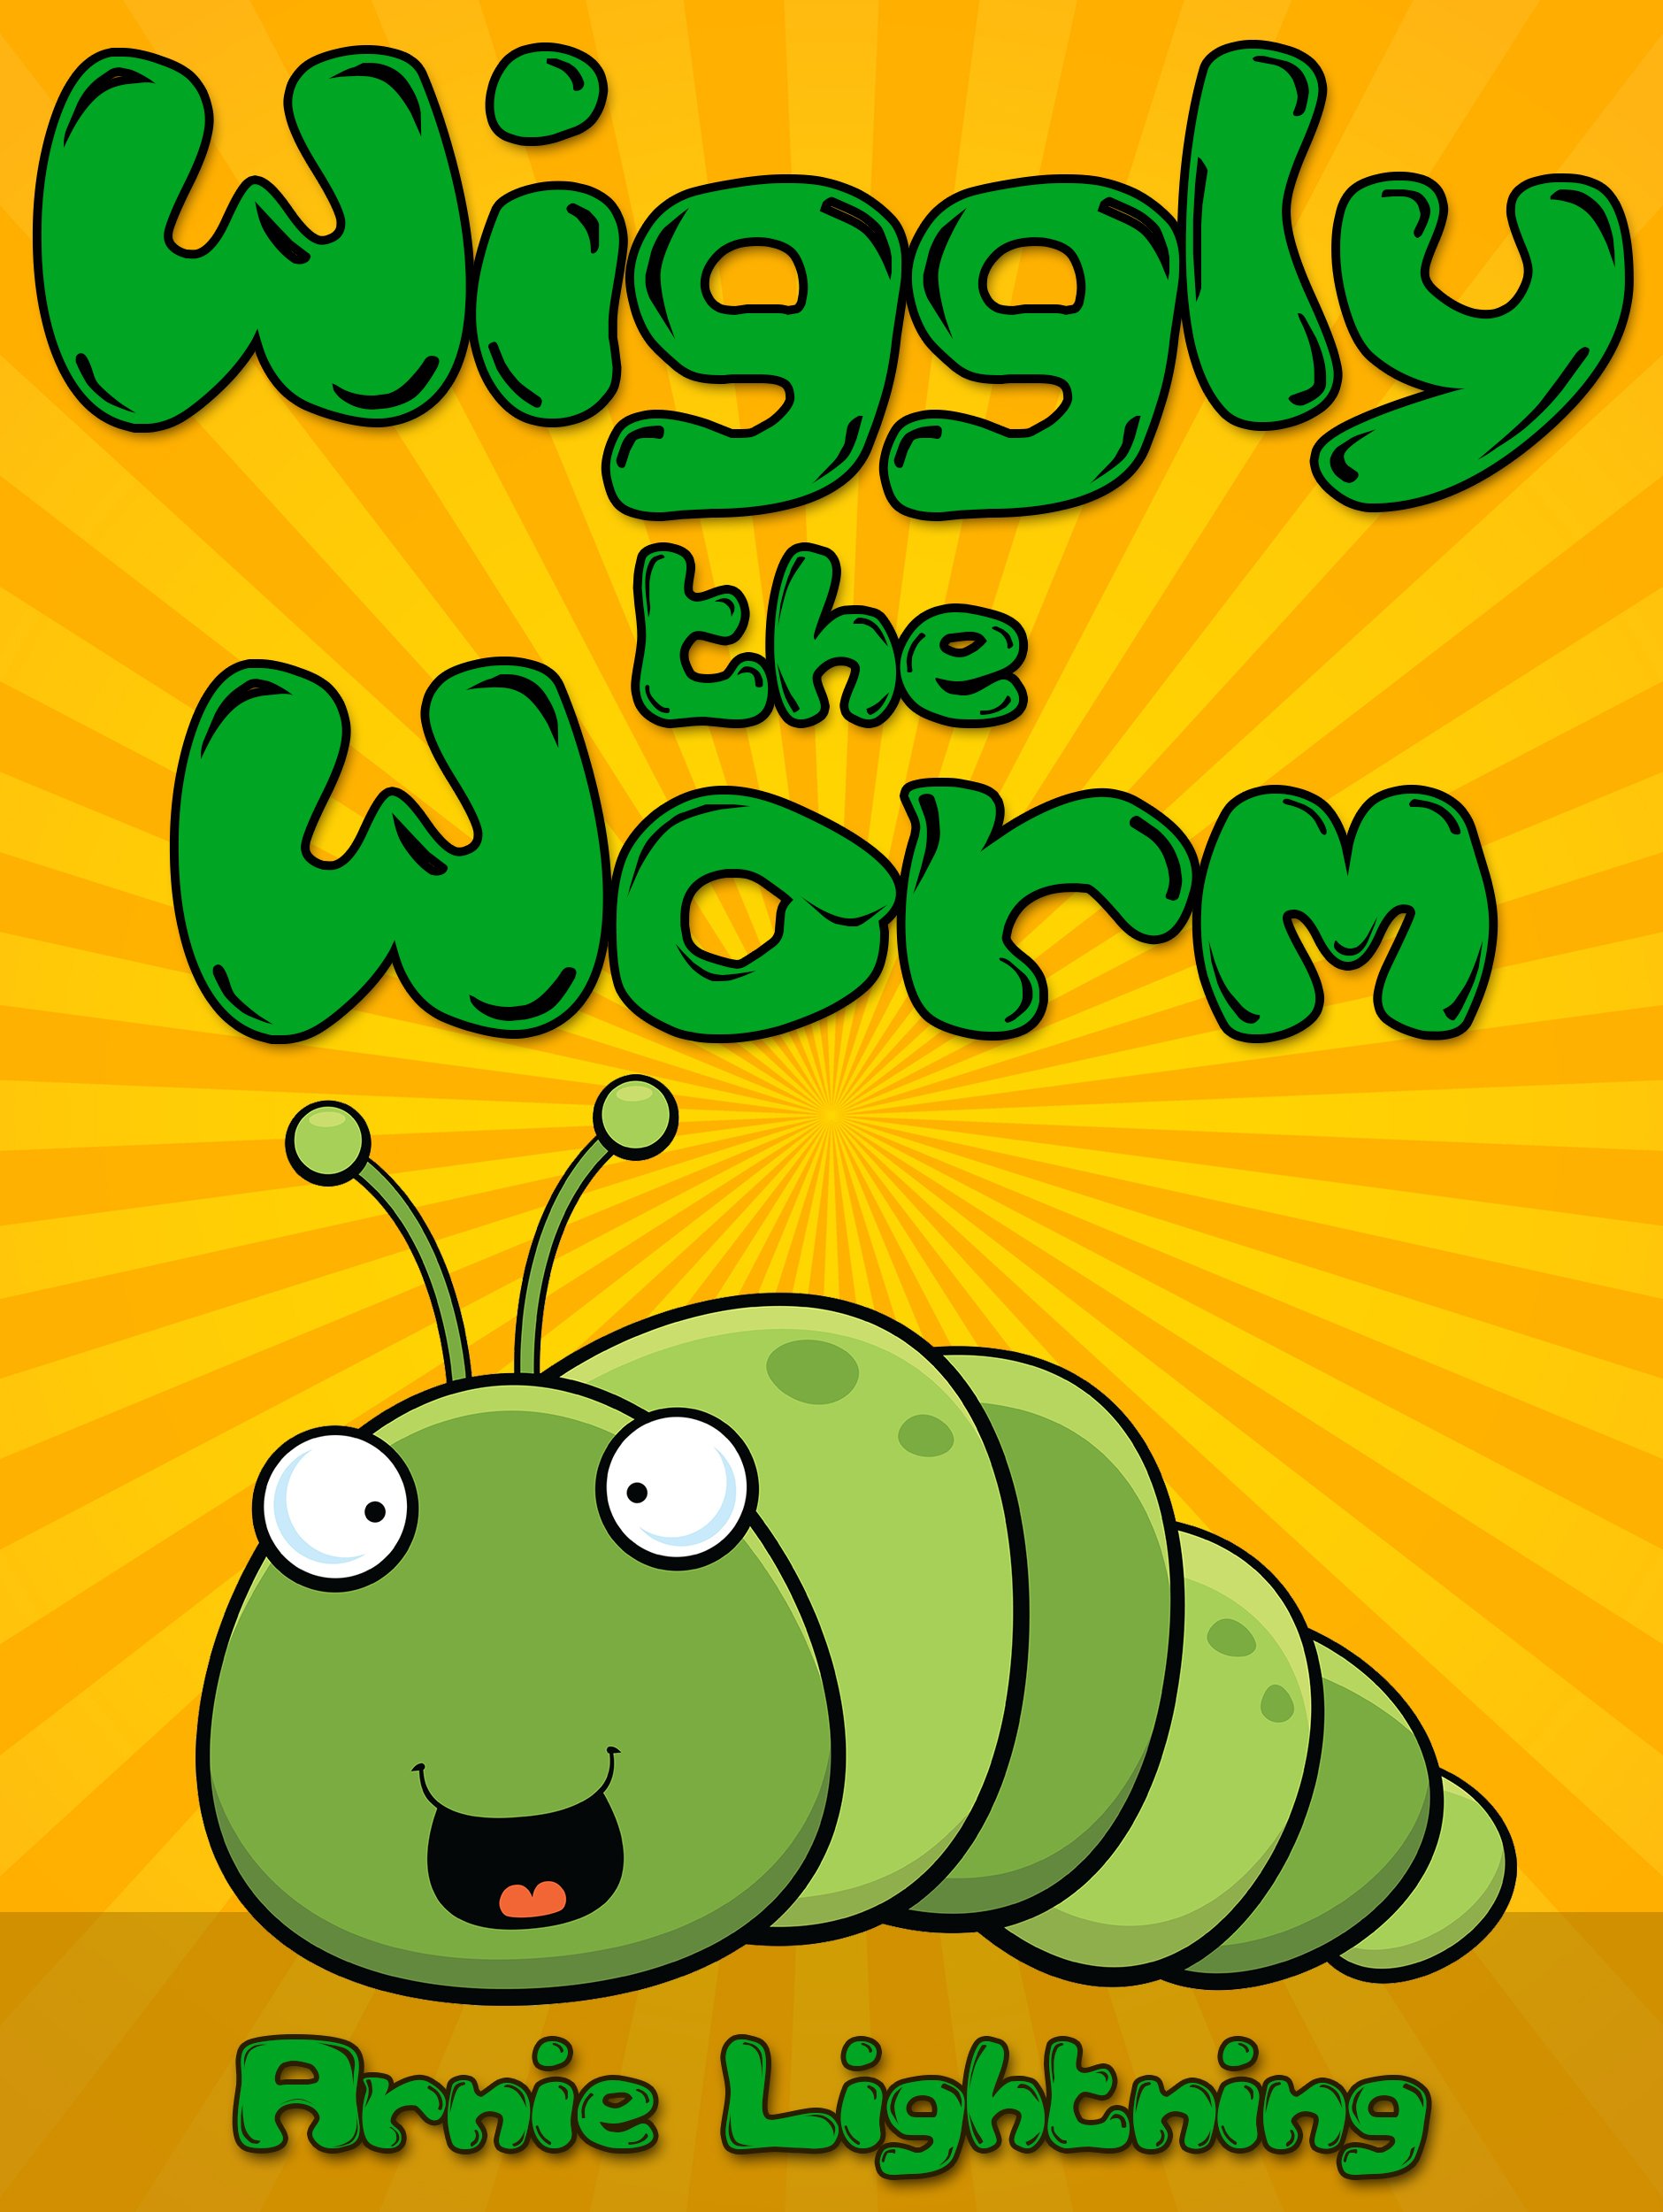 Wiggly the Worm: Fun Short Stories for Kids (Early Bird Reader Book 1)